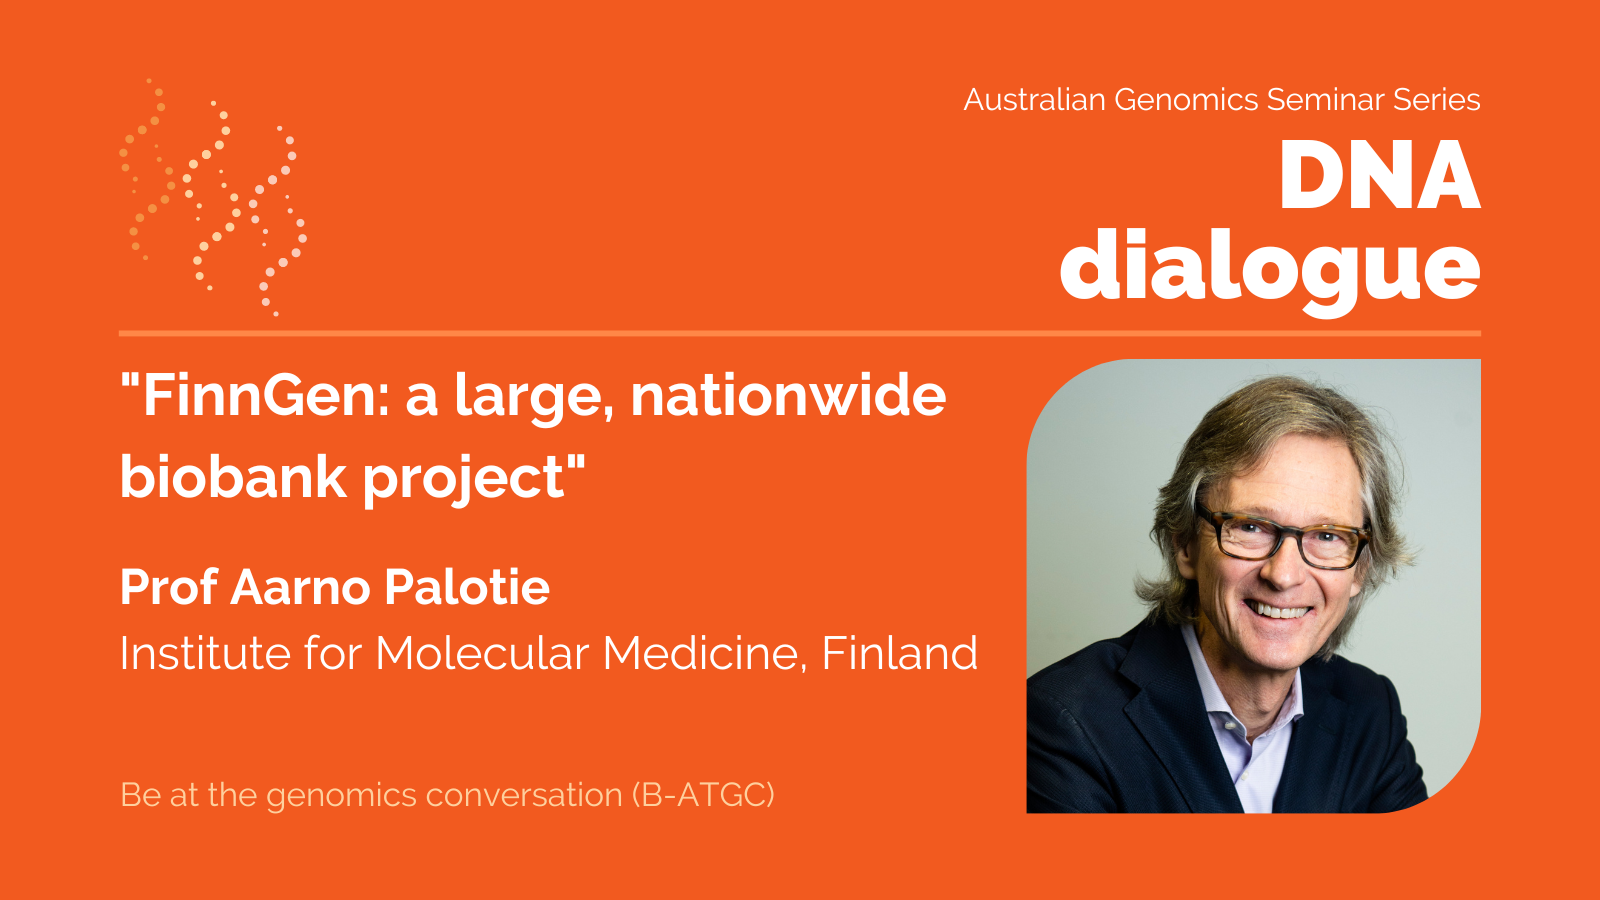 February DNA dialogue seminar with Prof Aarno Palotie